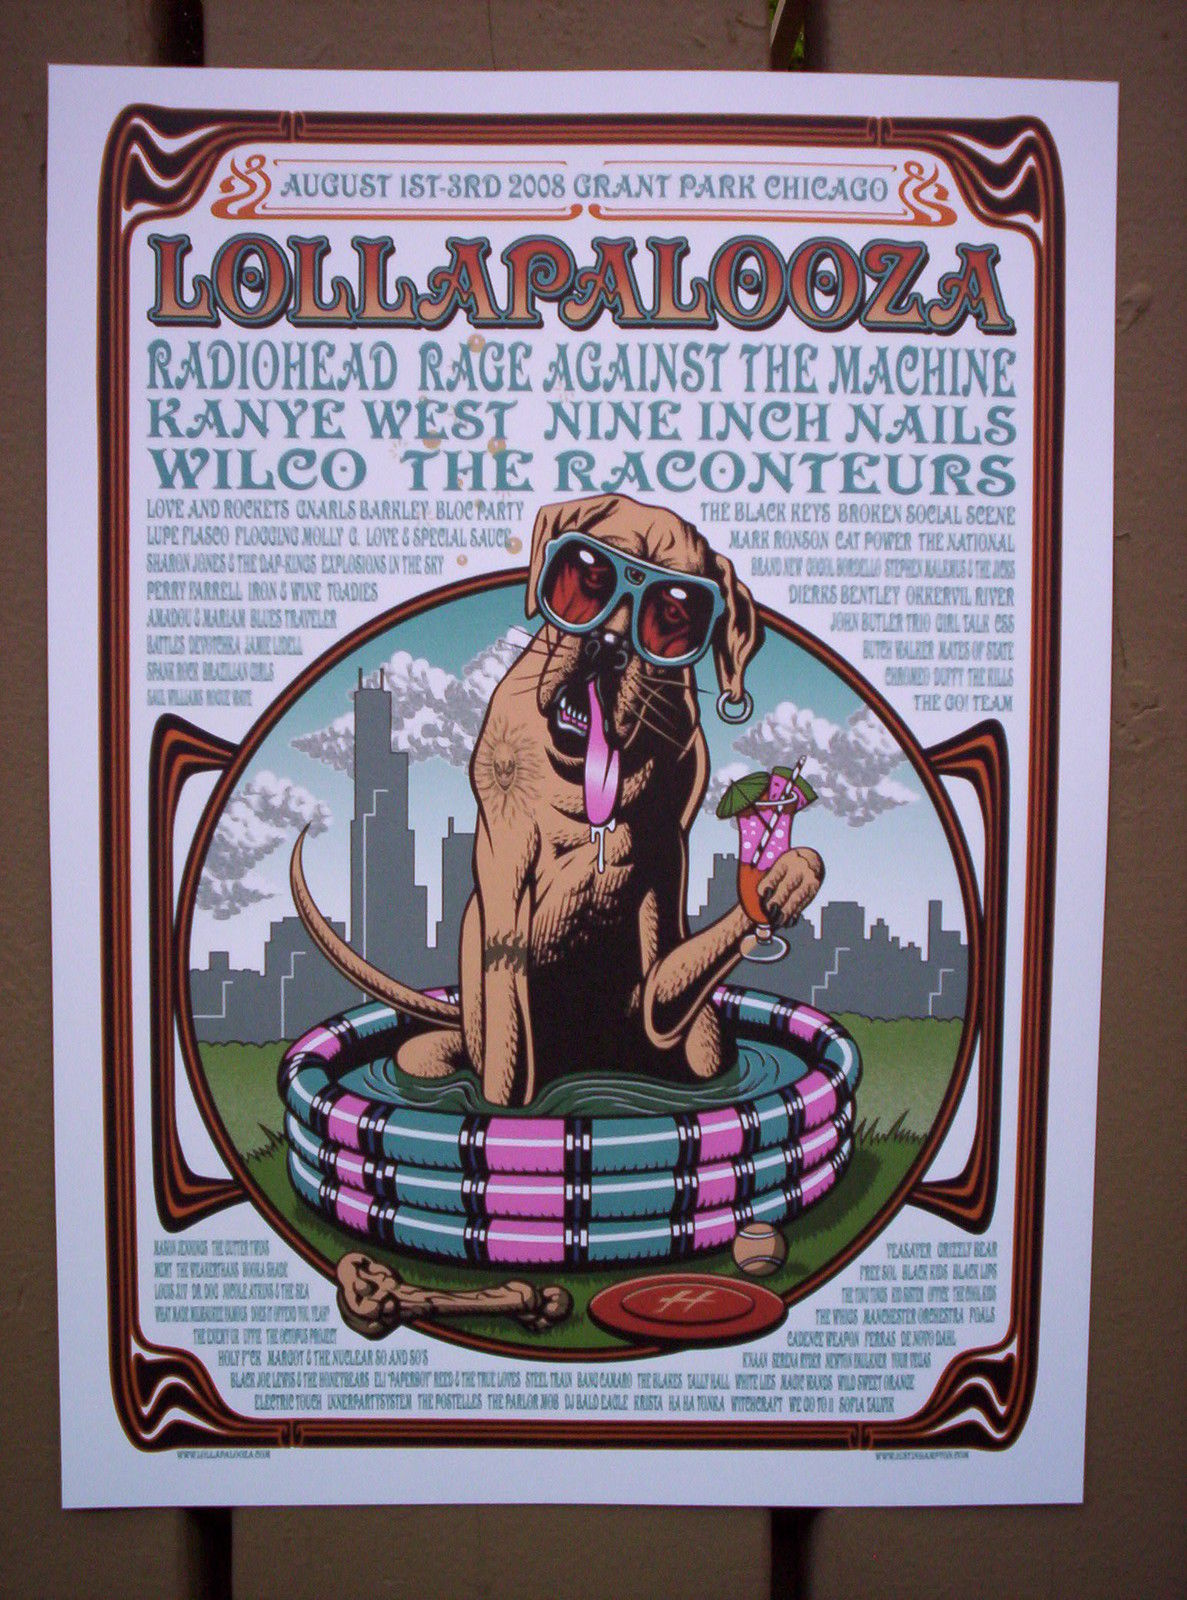 2008 Lollapalooza poster